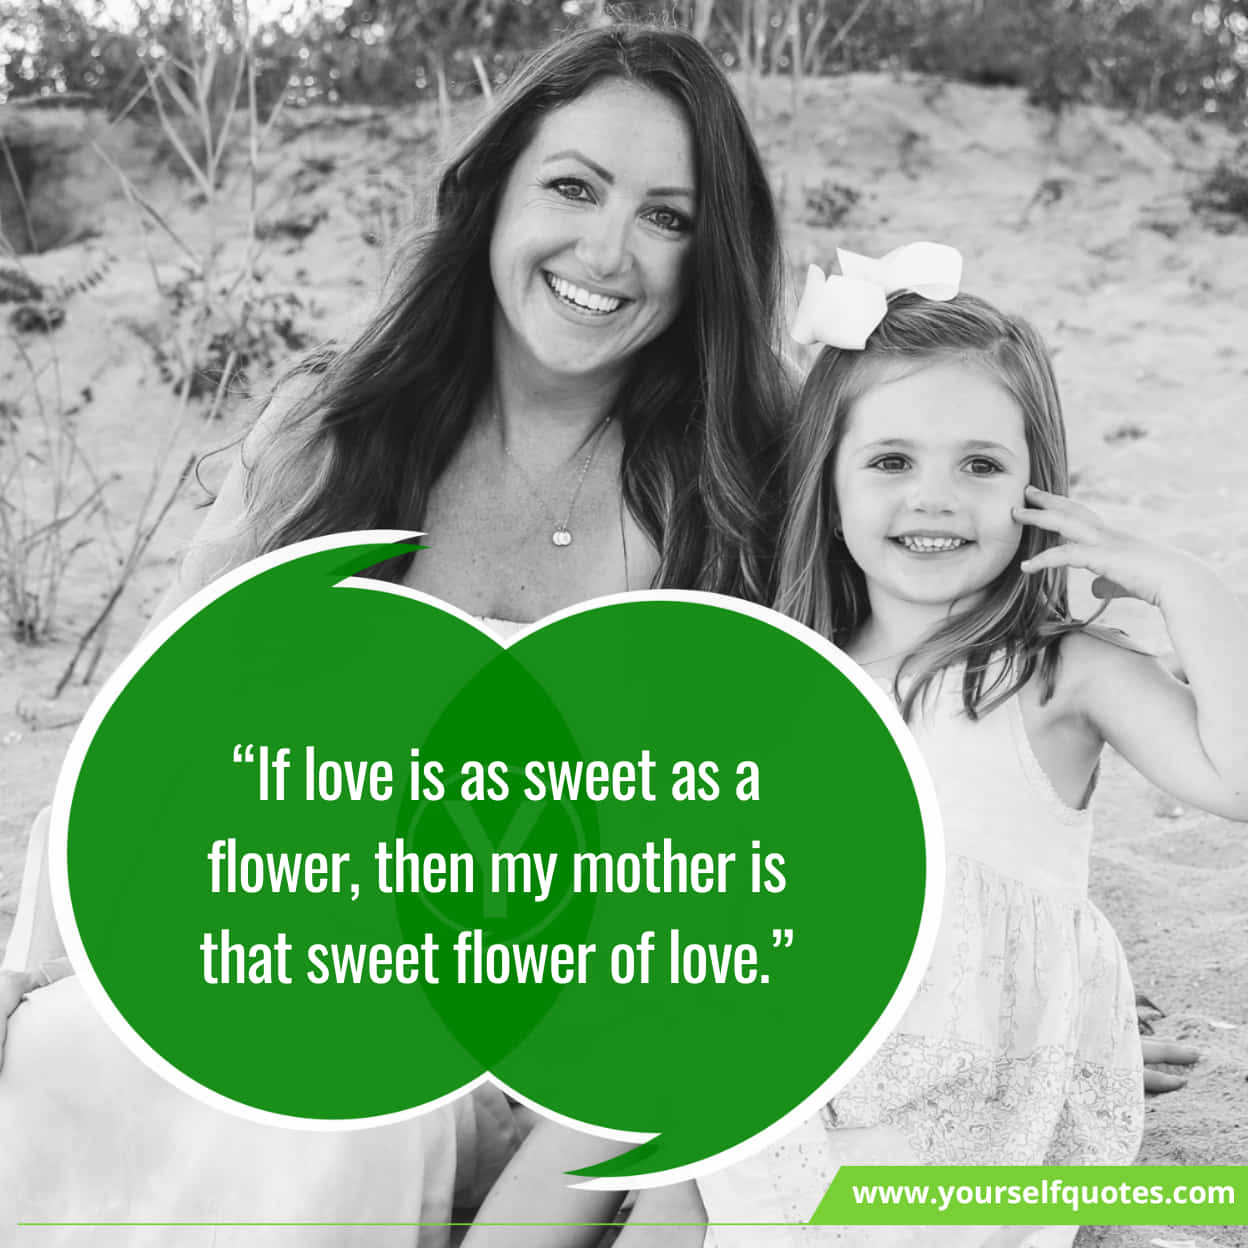 Inspiring Quotes For Happy Mothers Day 